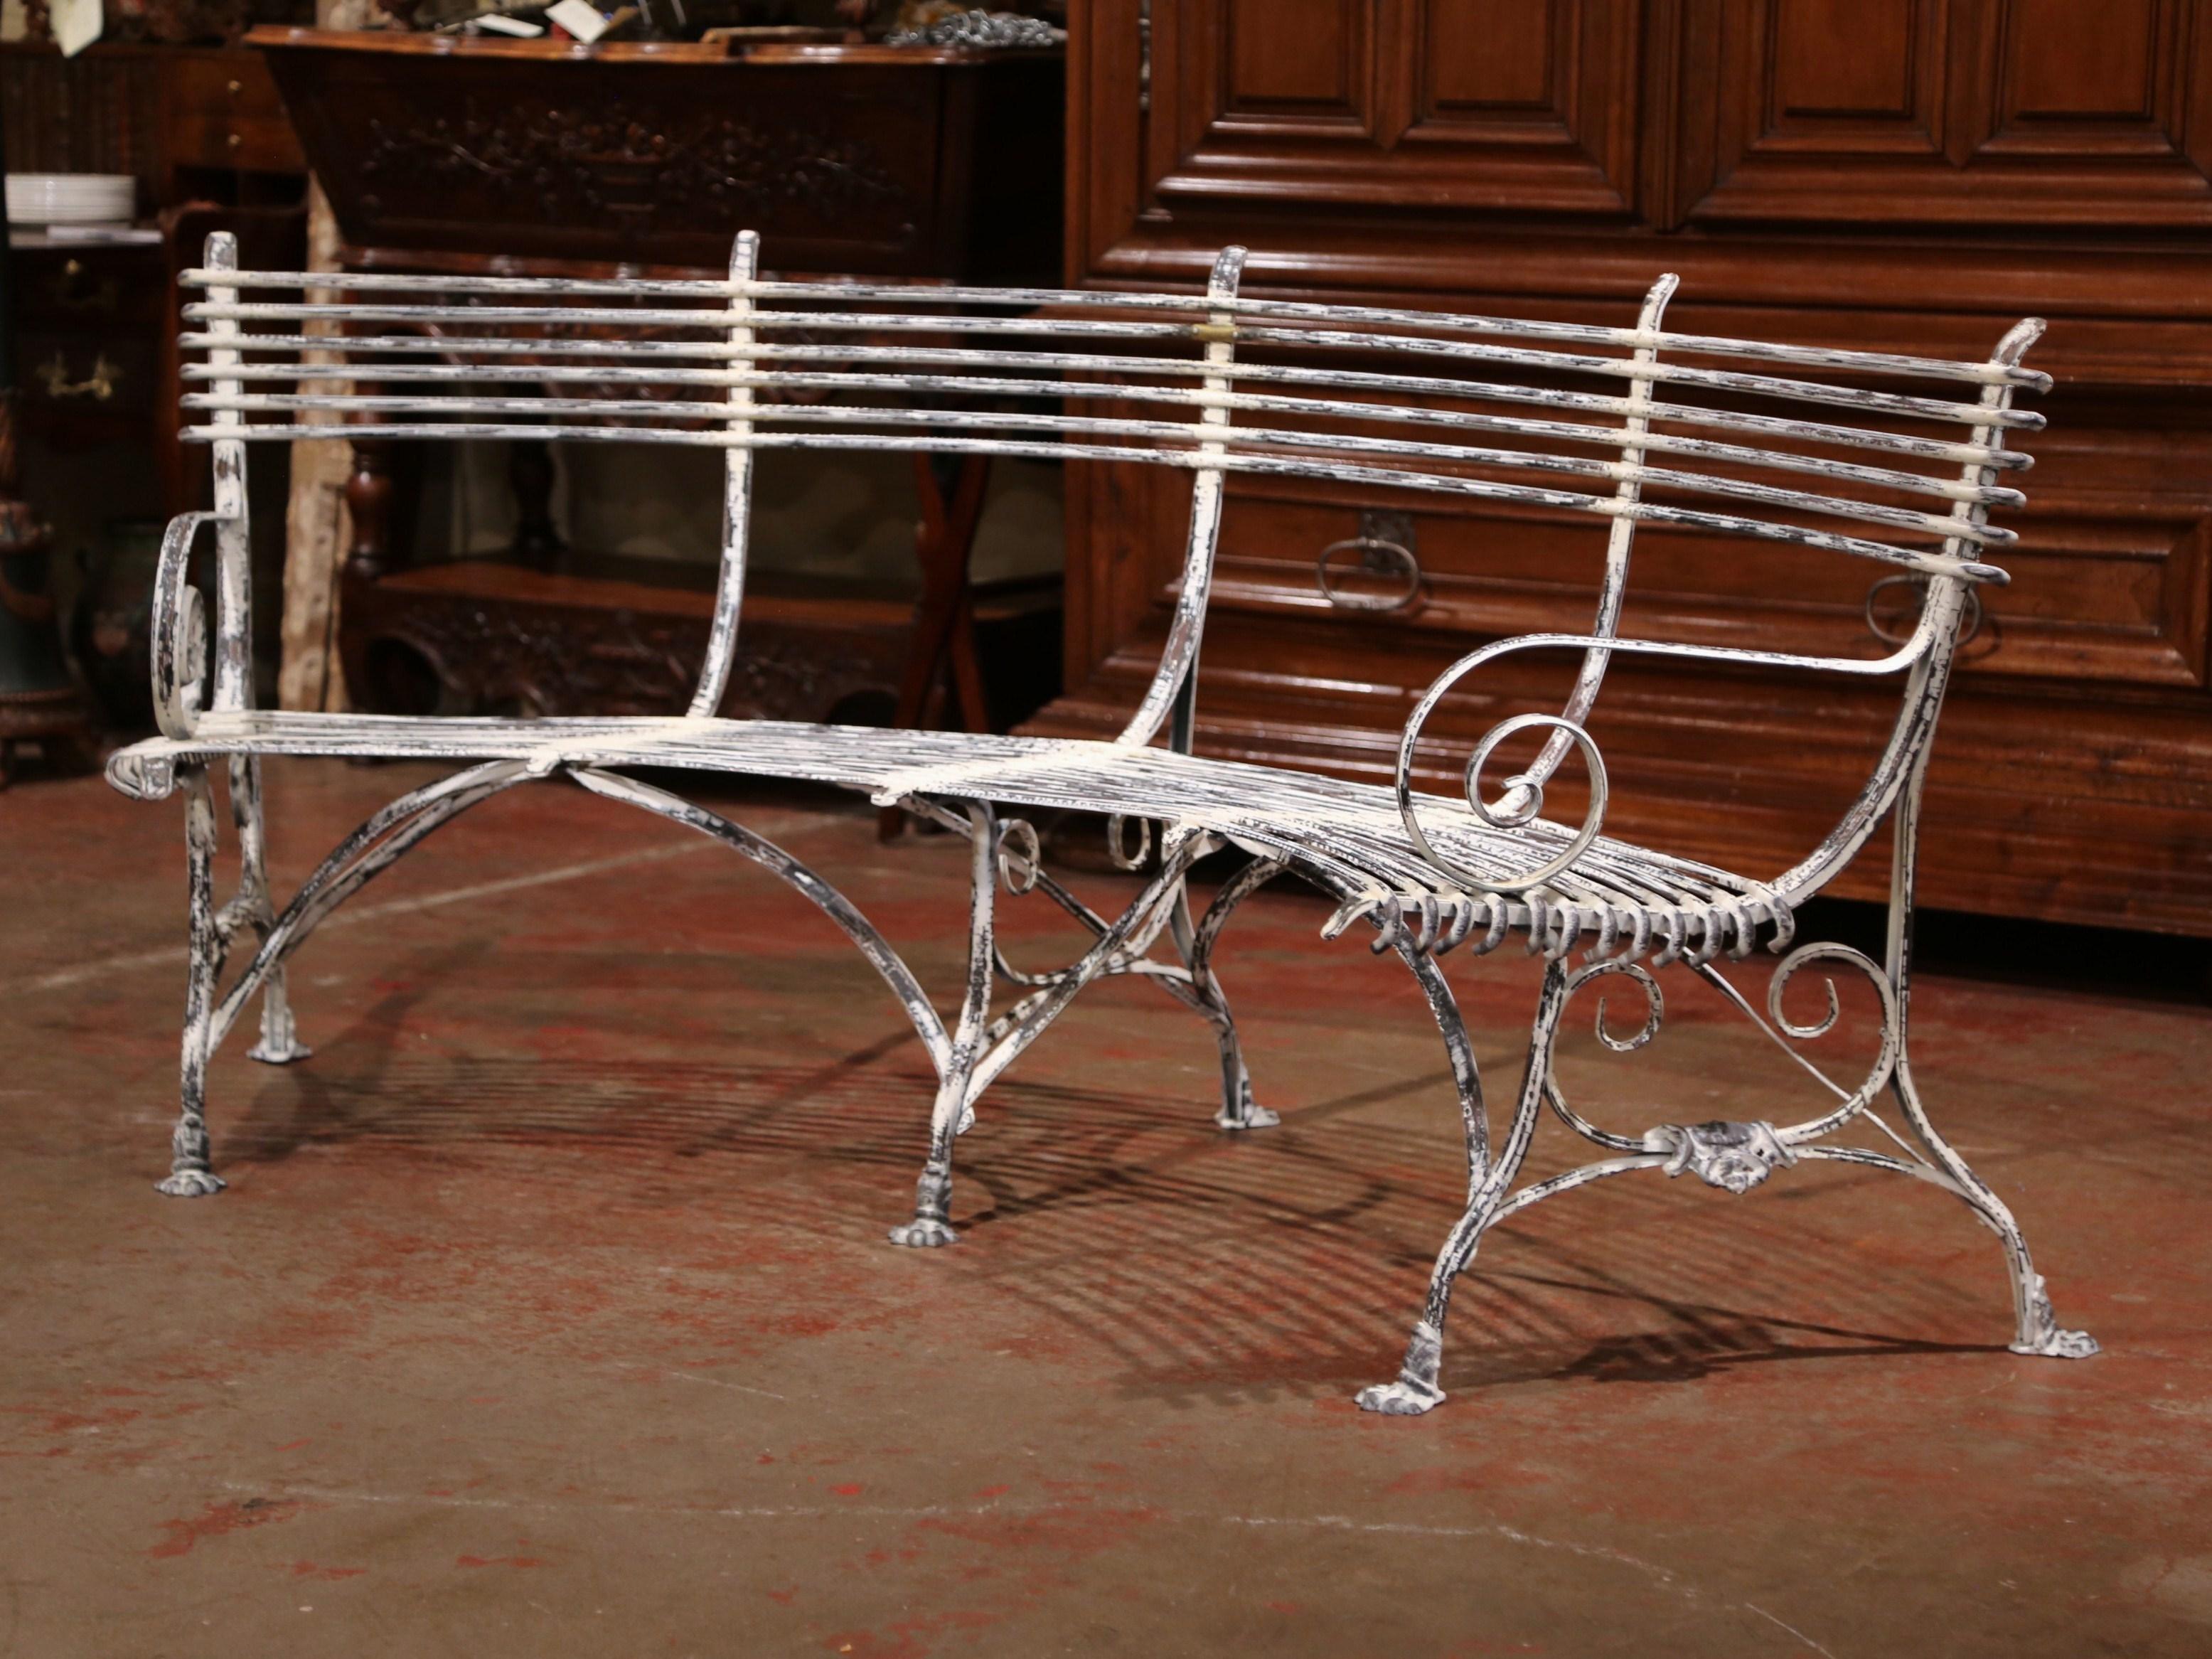 These elegant forged and curved iron benches were crafted in France. Each rounded bench has gracious lines, scrolled armrests, a curved back and six paw feet connected with arched stretchers. The benches are signed Sauveur a Arras (north of Paris)